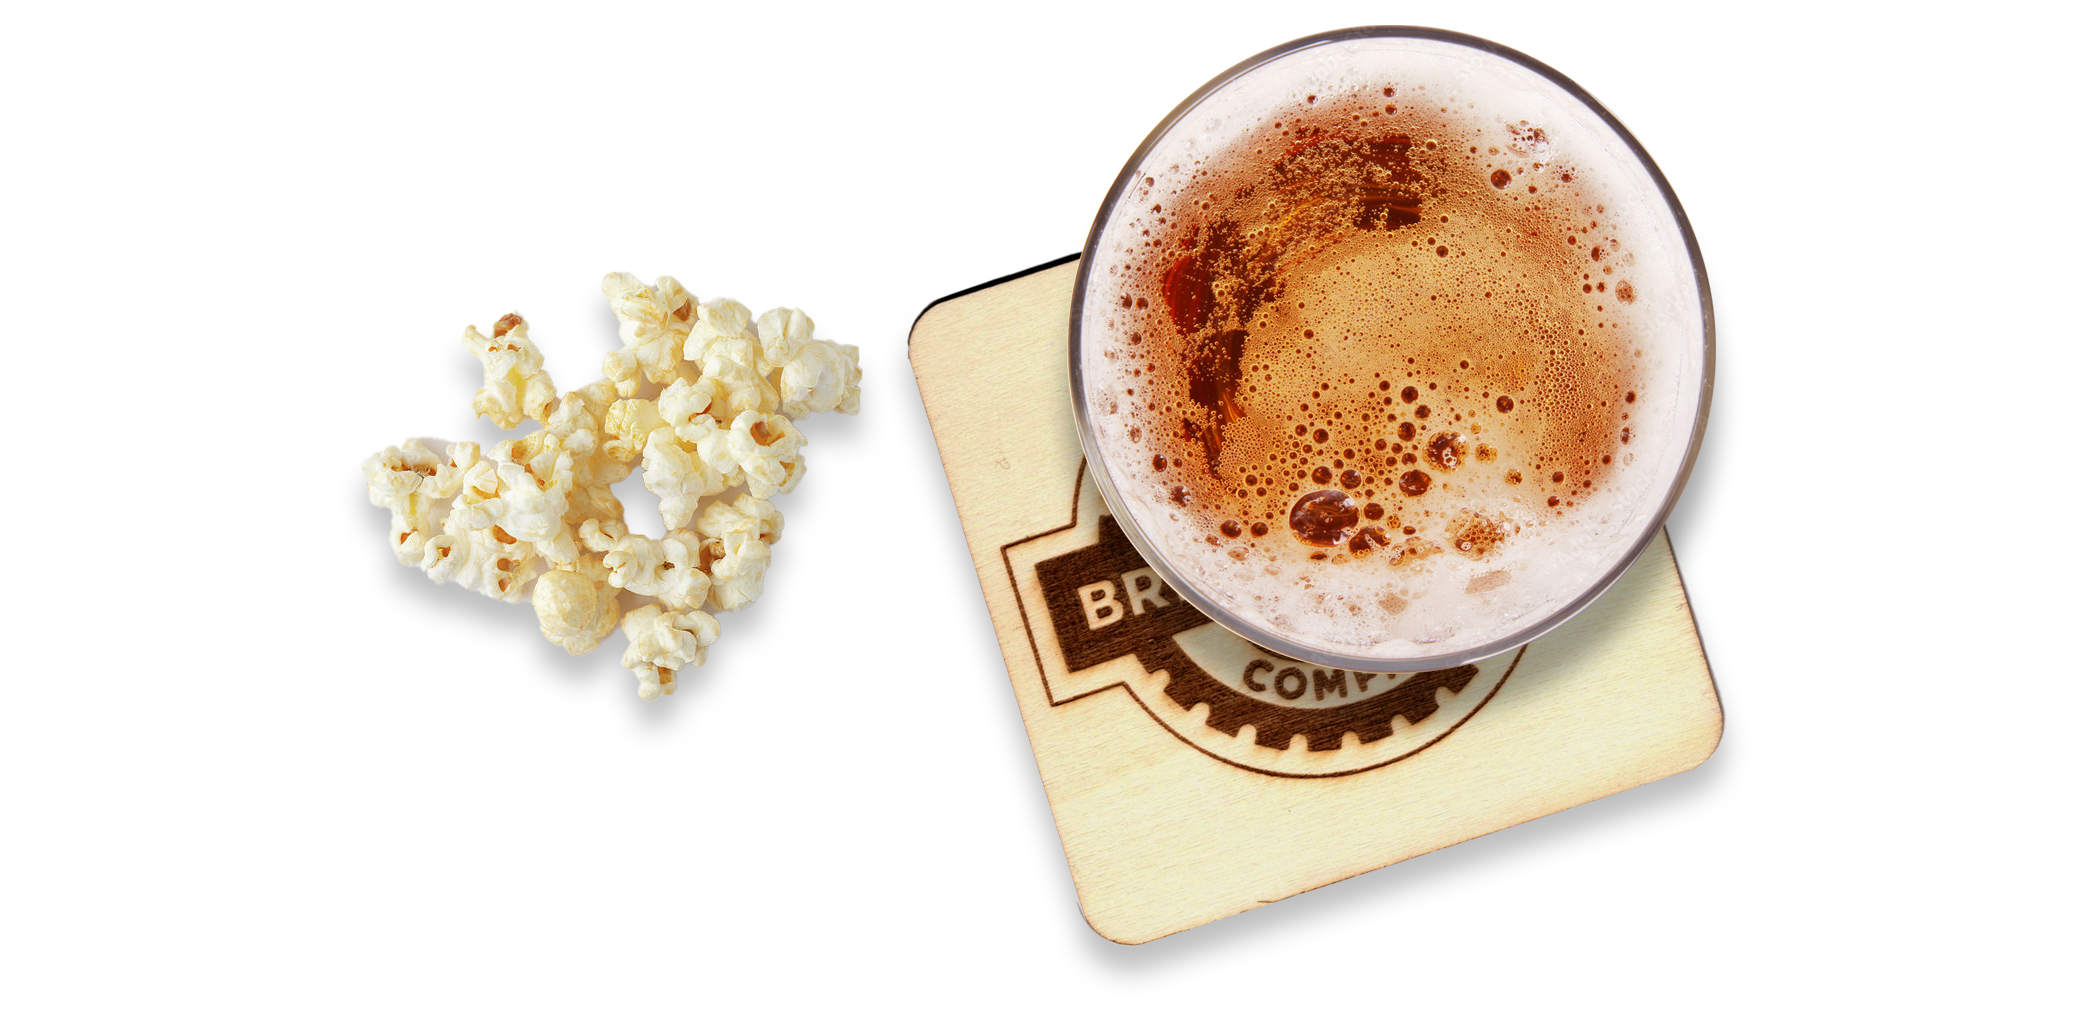 Delicious high quality beer on our engraved coasters with Old Bay seasoned popcorn.